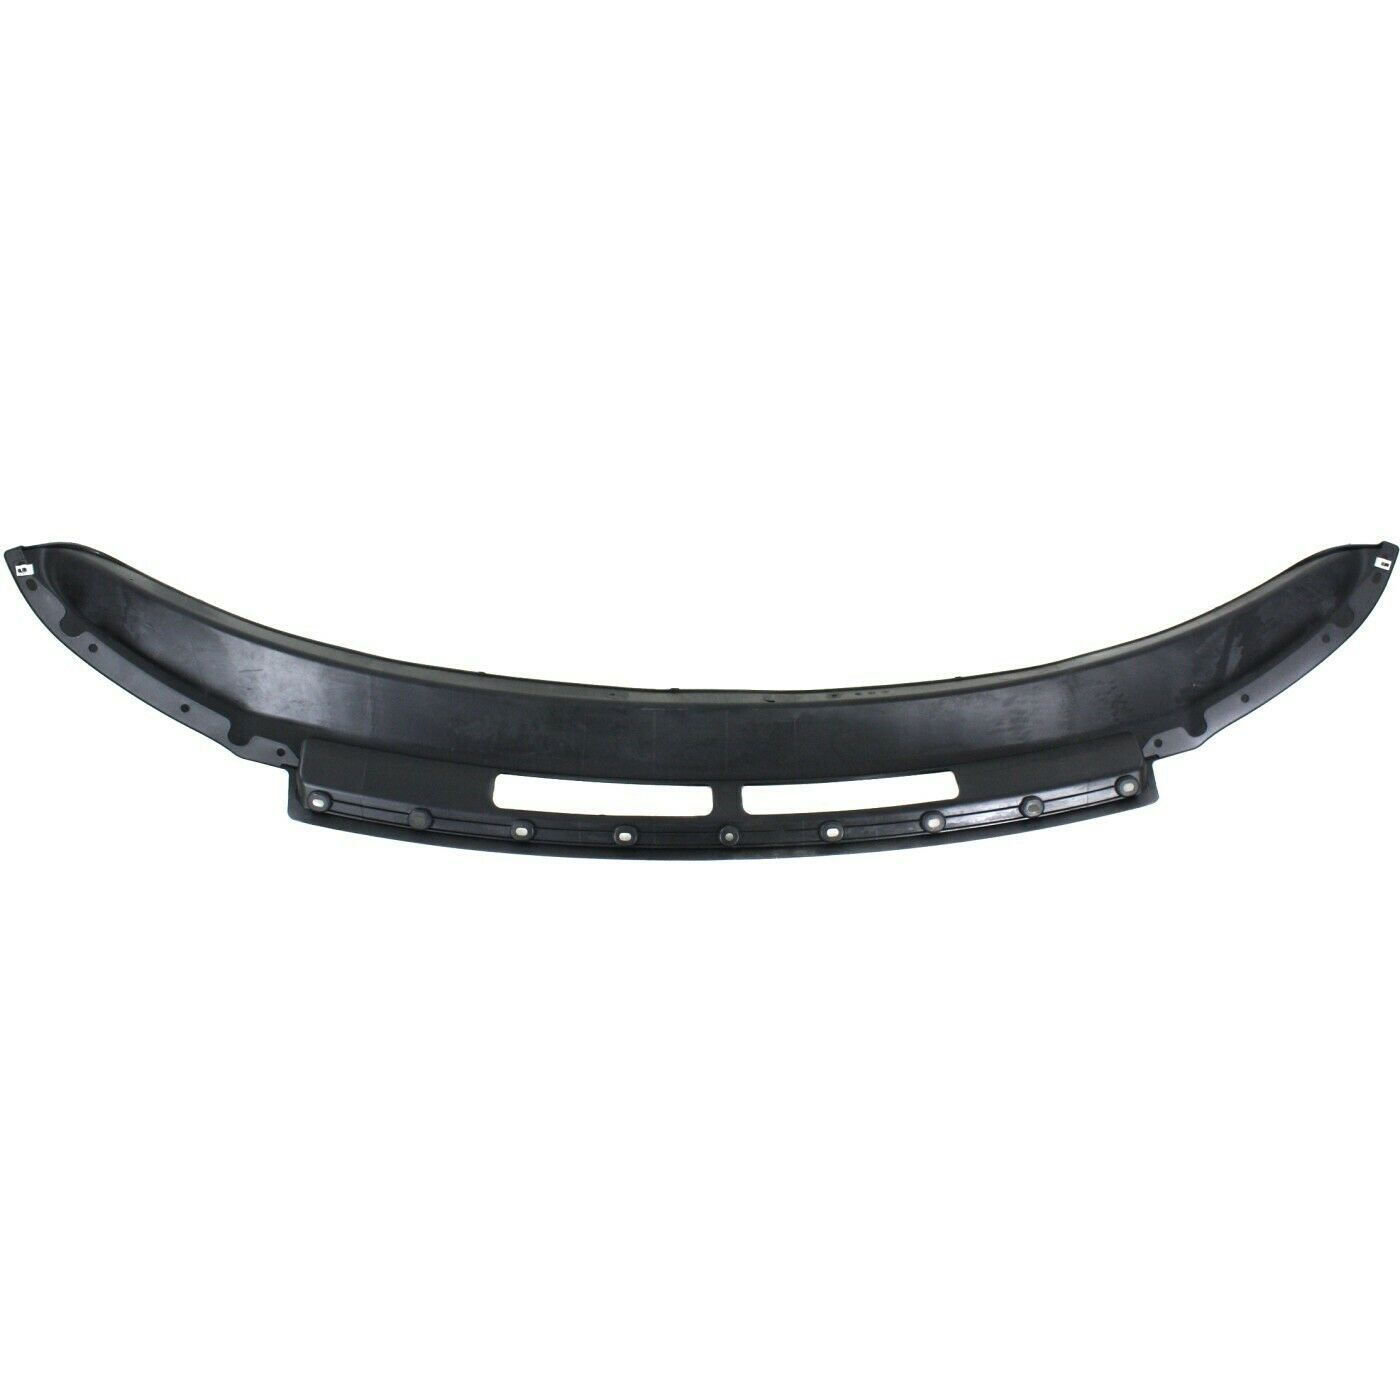 Dodge Ram 2013 - 2018 Front Textured Lower Valance 13 - 18 CH1090149 Bumper-King